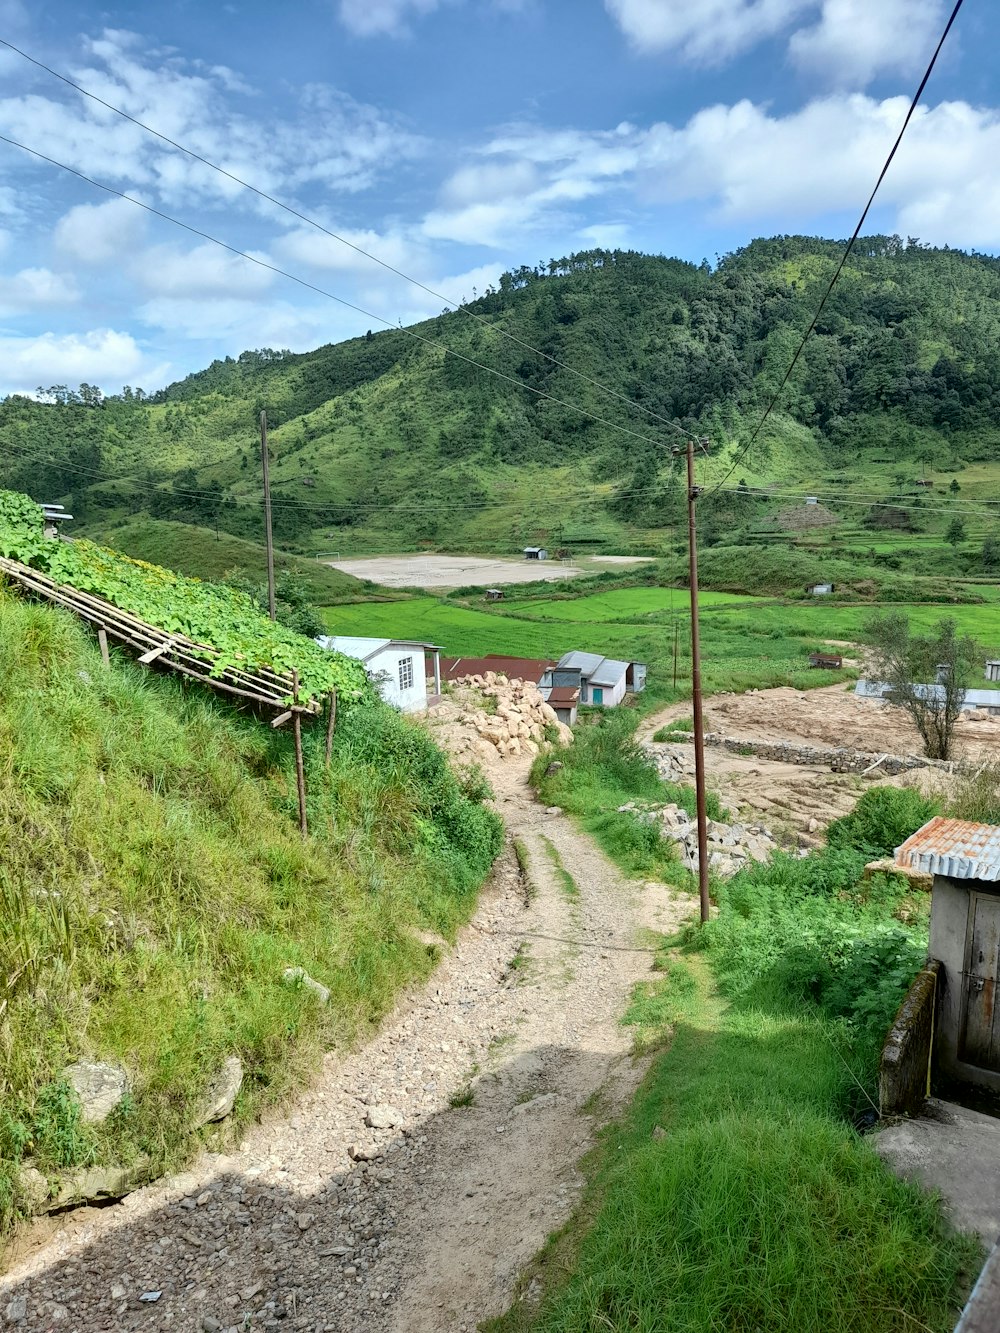 a dirt road with houses on the side and trees on the side